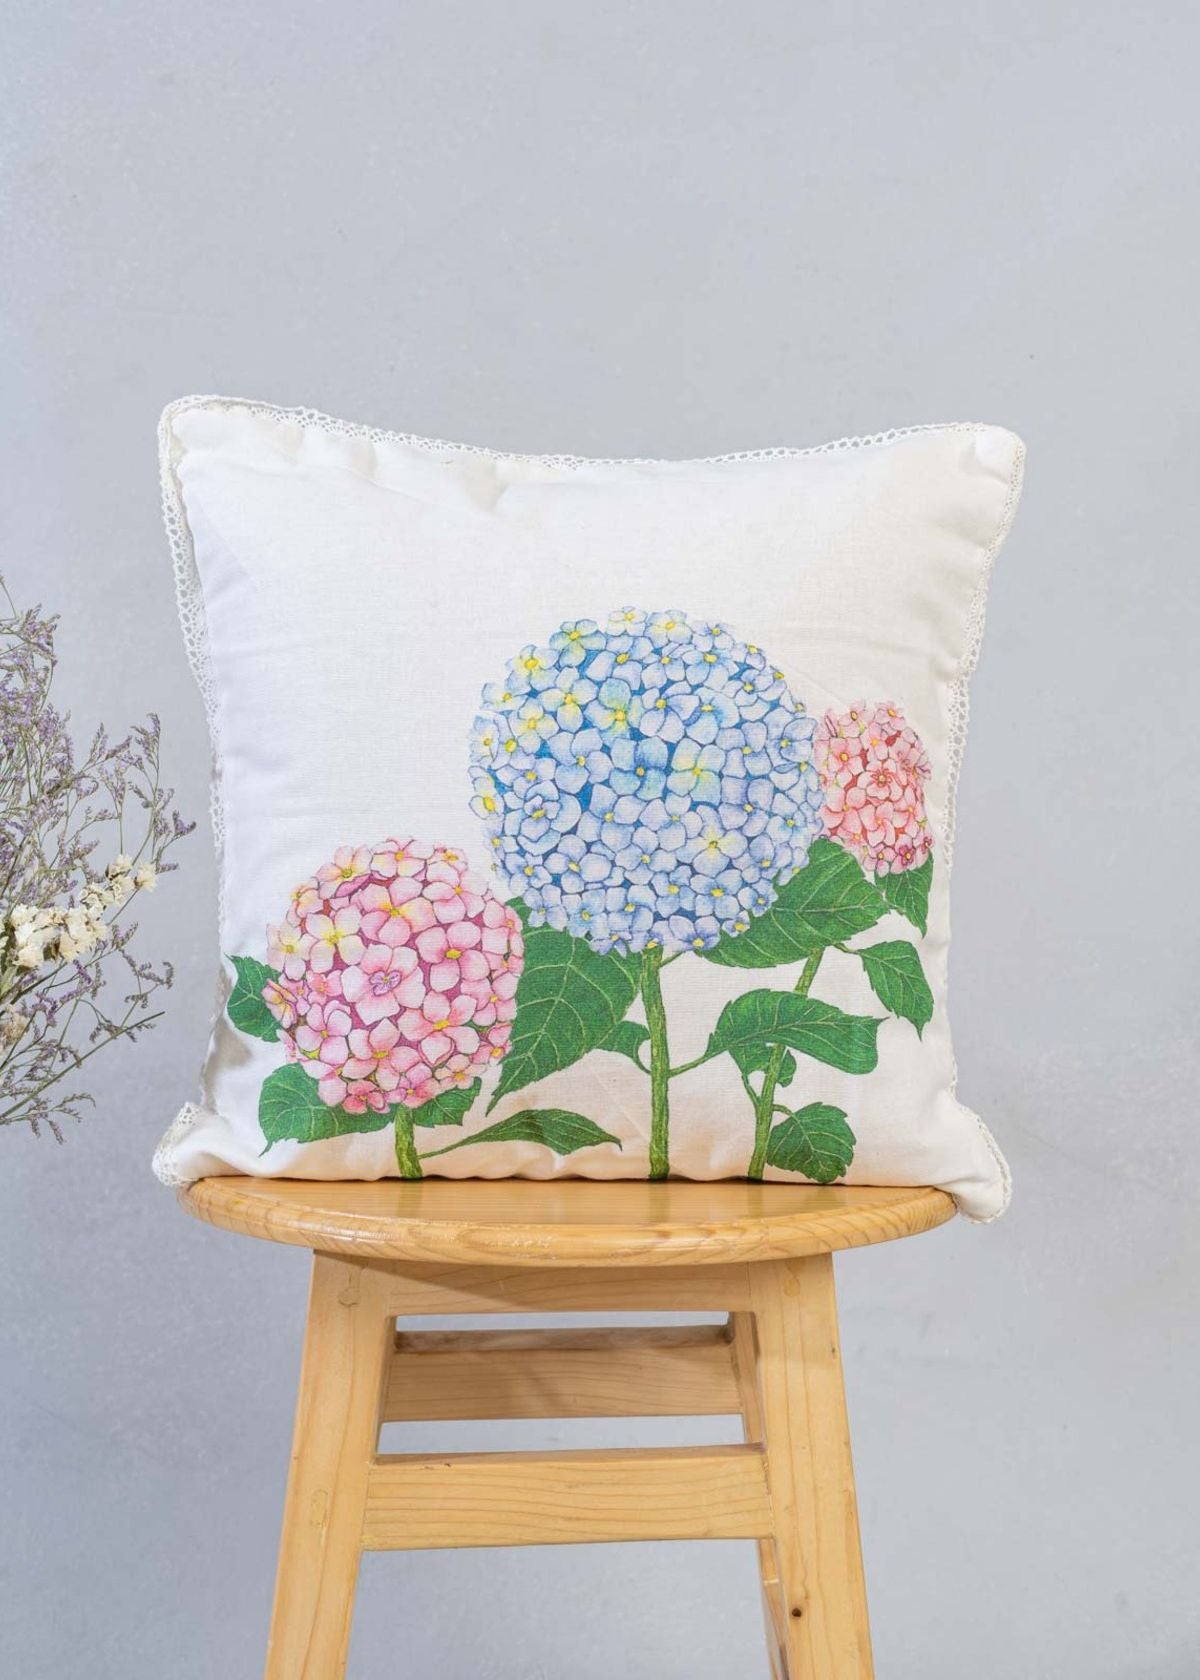 Bouquet of Hydrangea 100% cotton decorative floral cushion cover for sofa with lace - Blue